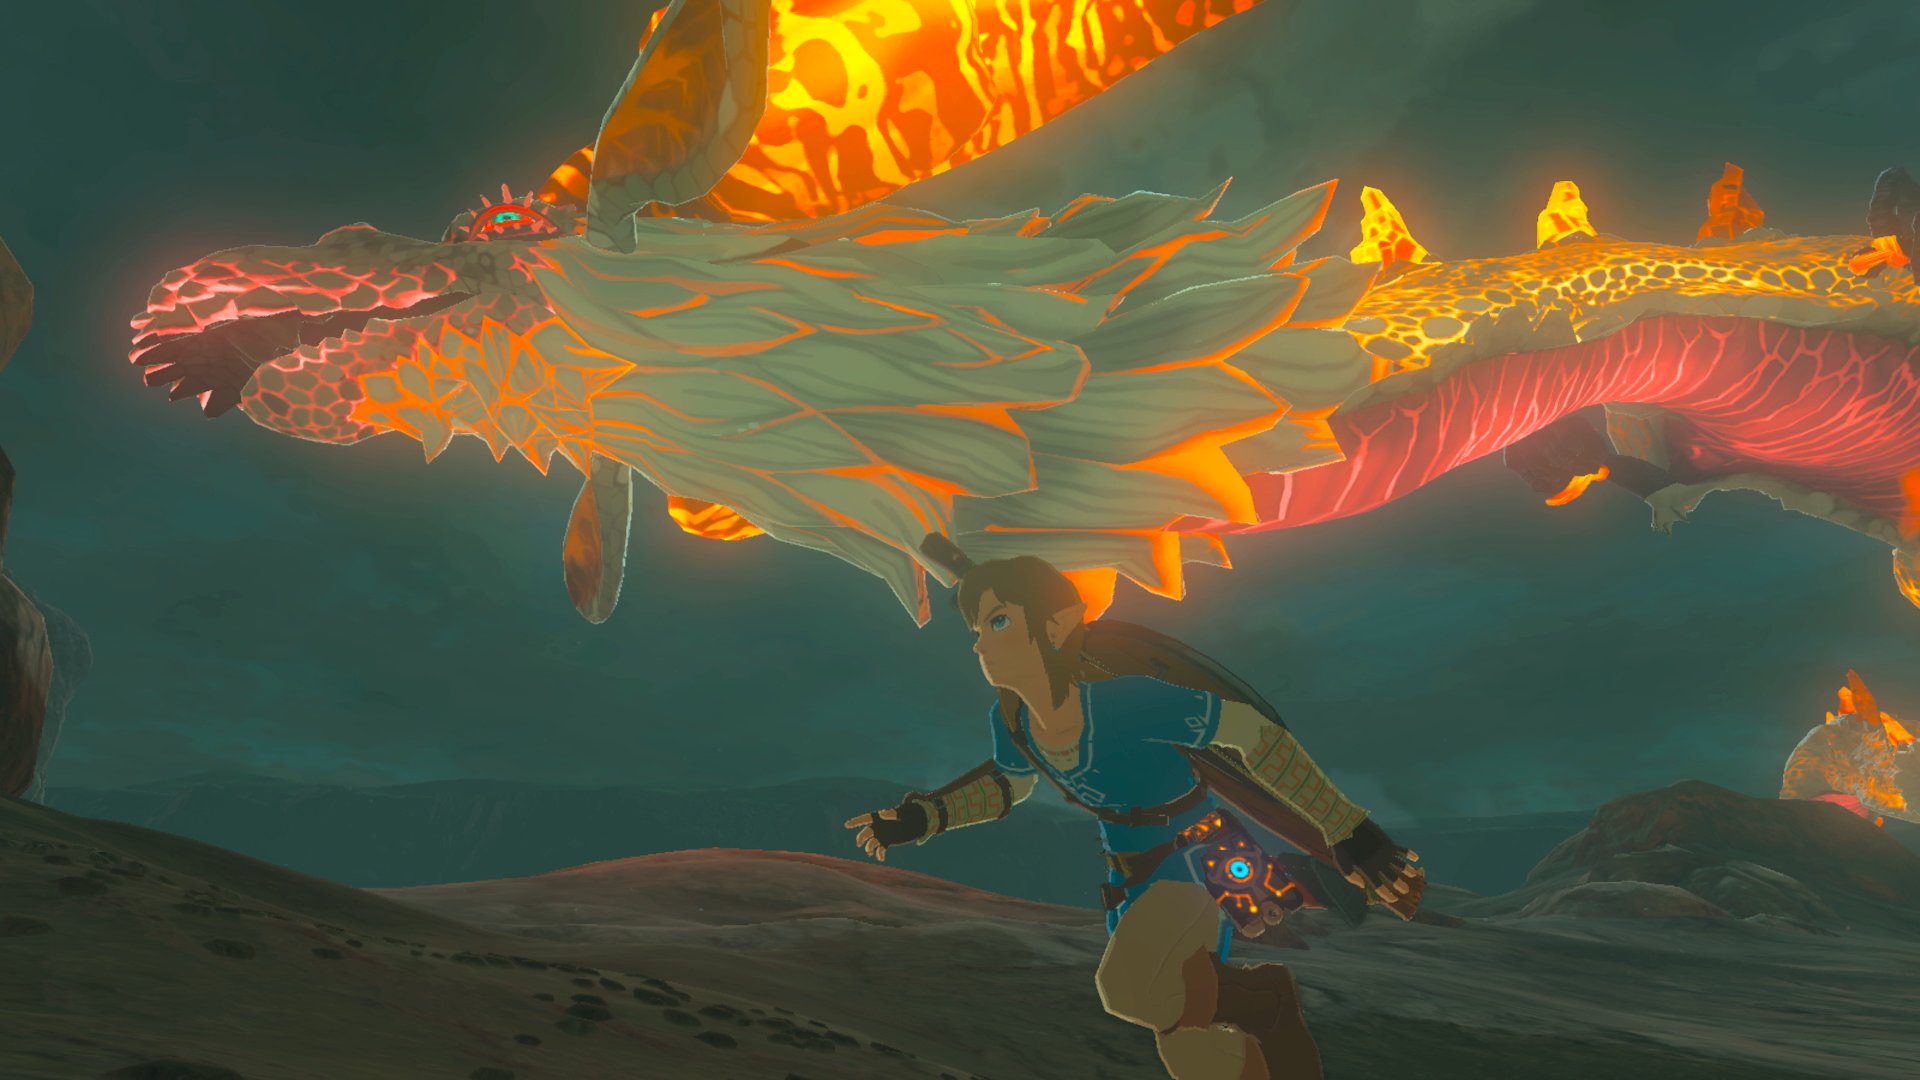 This Week’s Contest: Rise of the Zelda Dragons.